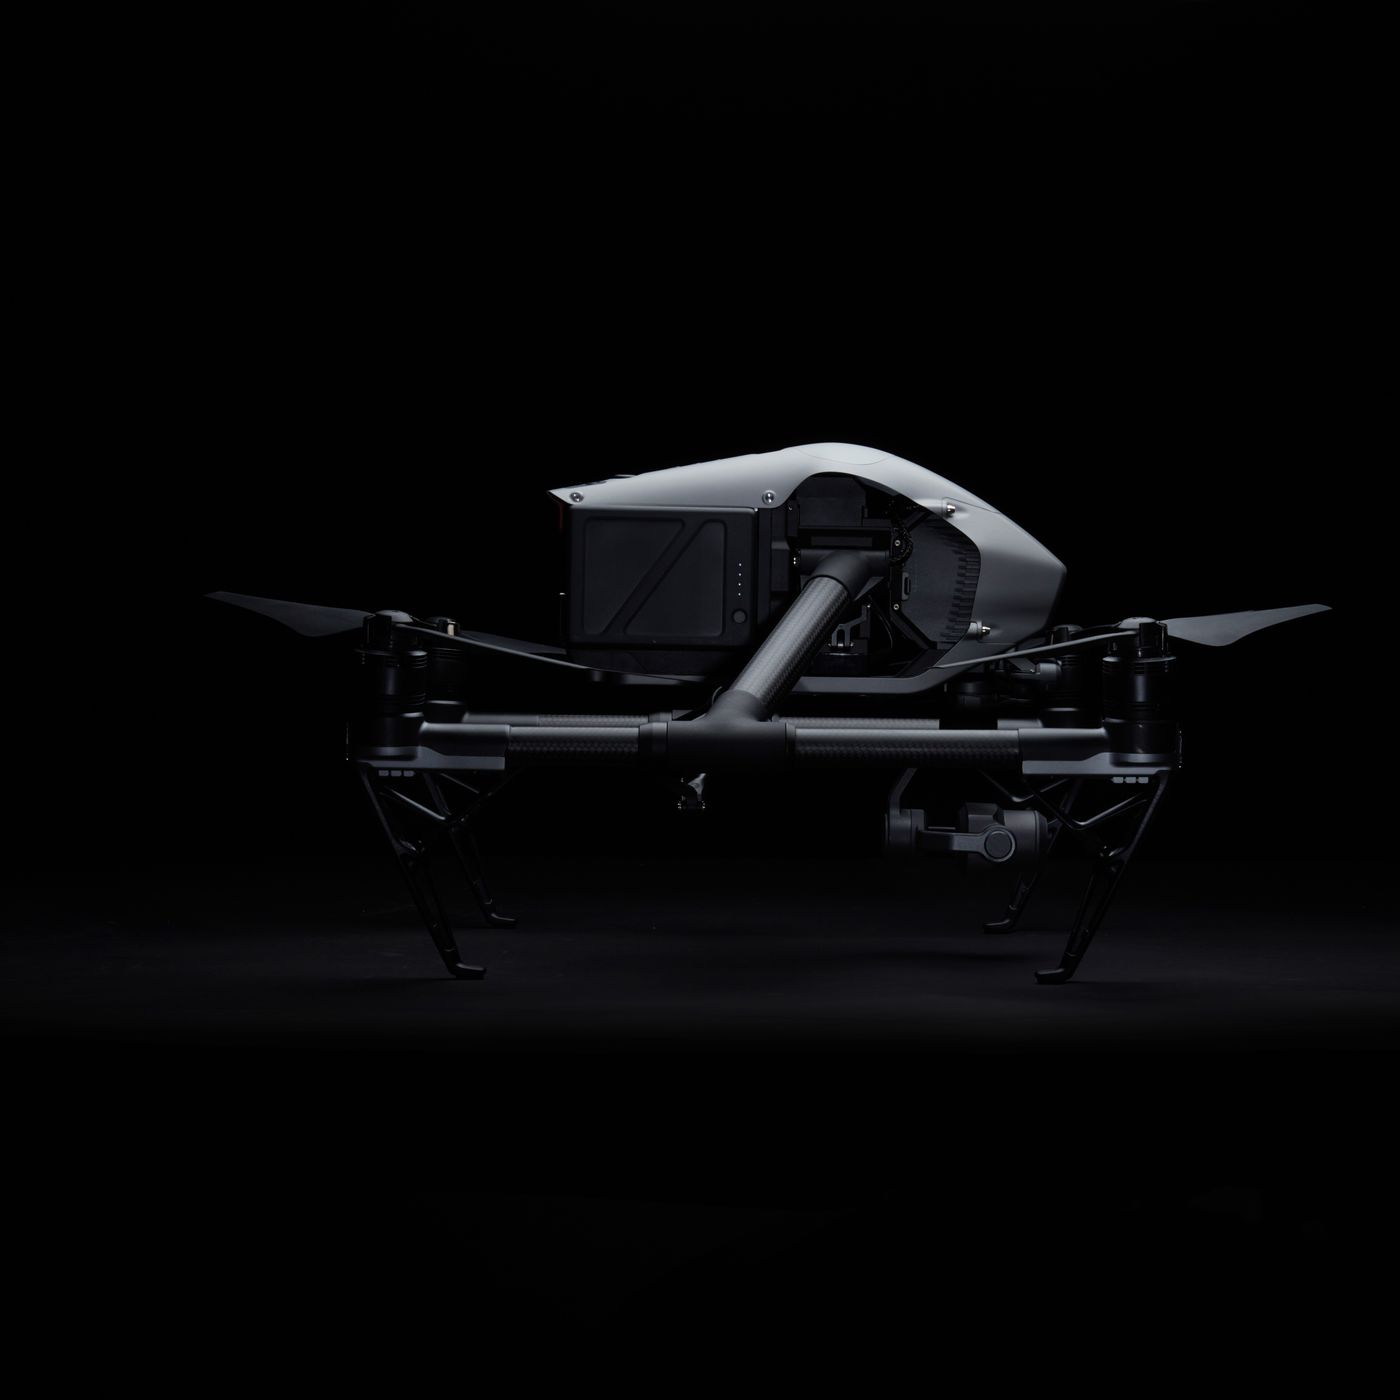 The DJI Inspire 2 is a powerful, professional drone An all-new image processing system records at up to 5.2K in CinemaDNG RAW, Apple ProRes, and more.